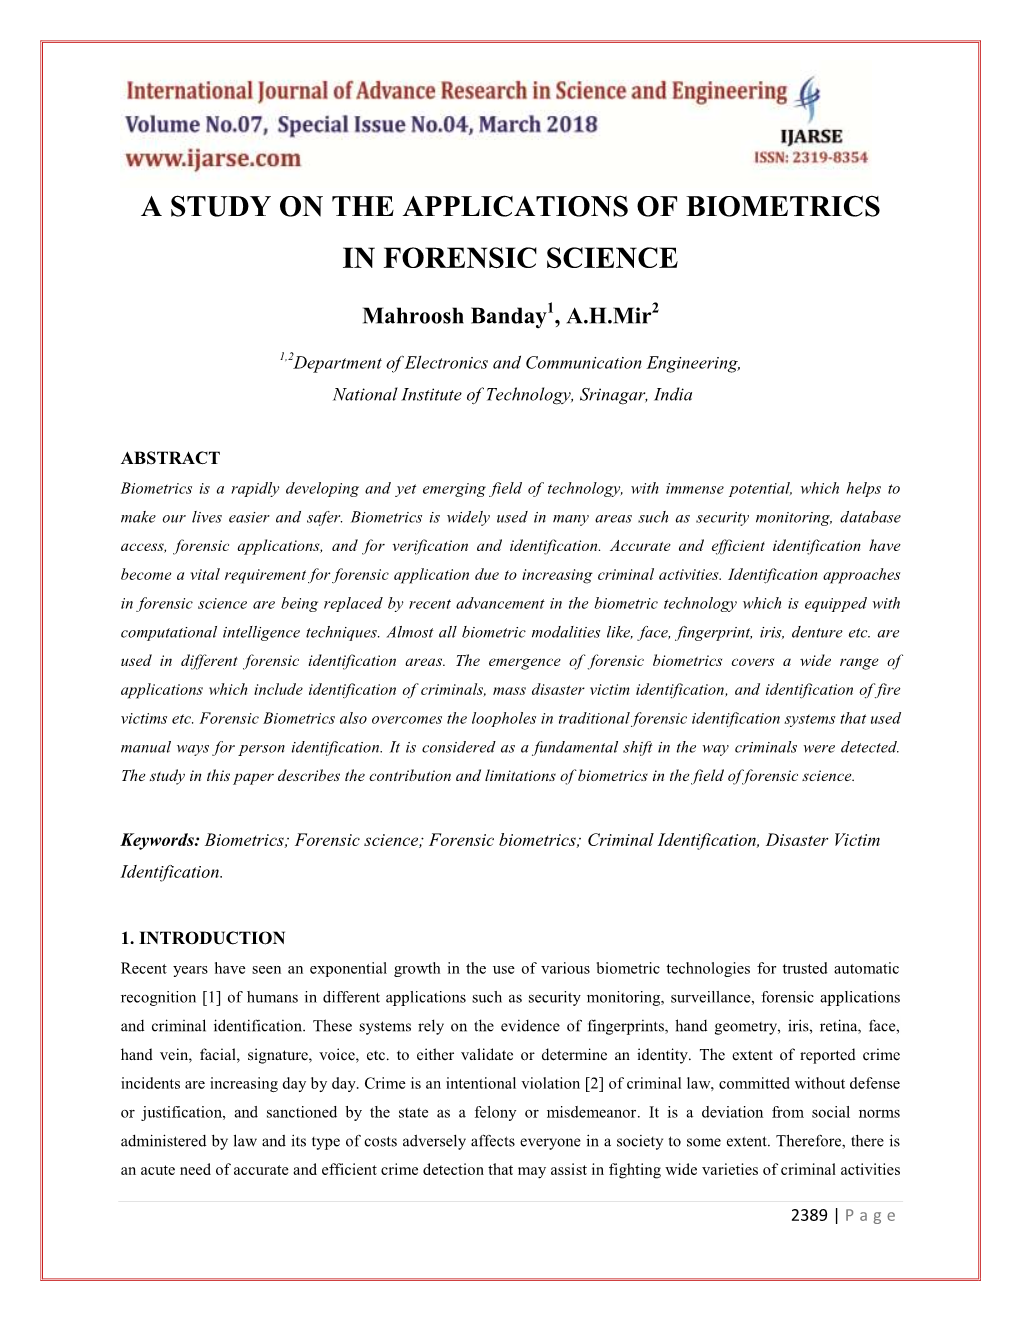 A Study on the Applications of Biometrics in Forensic Science